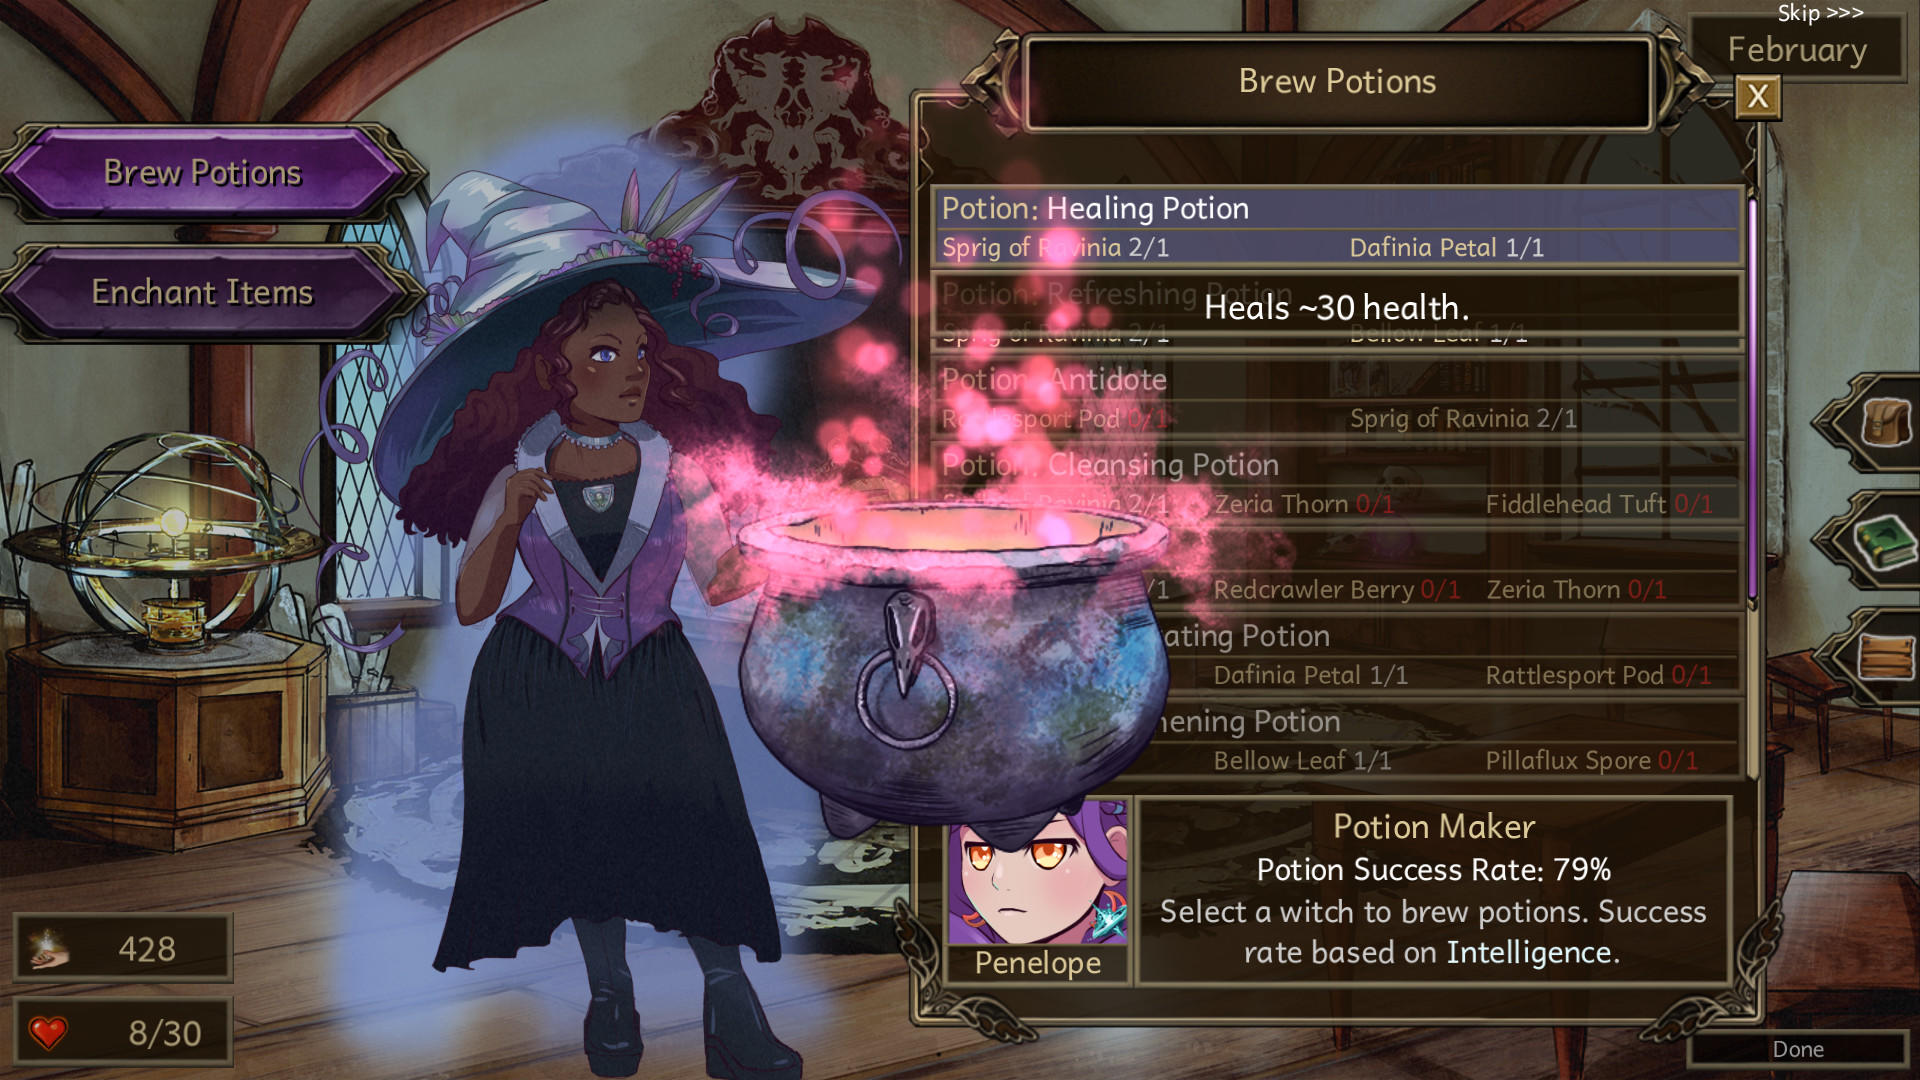 Stardander School for Witches screenshot game